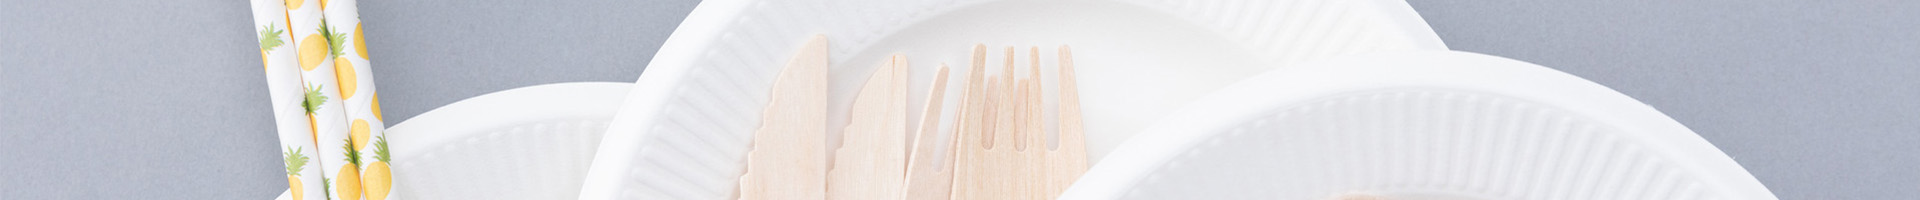 Wooden / Bamboo Tableware